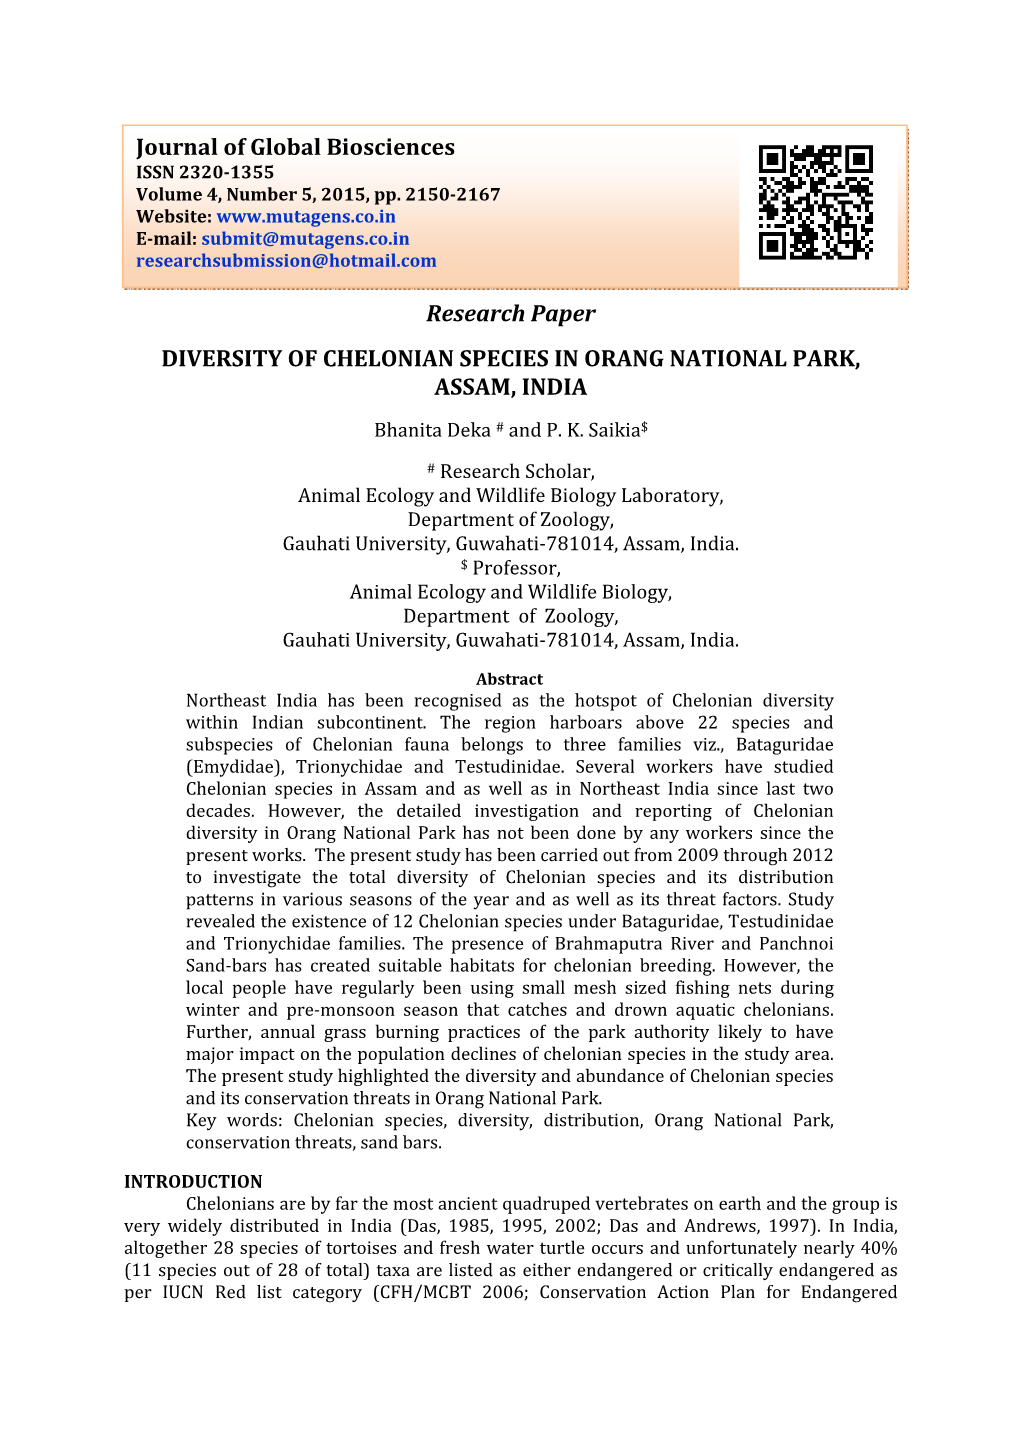 Research Paper DIVERSITY of CHELONIAN SPECIES in ORANG NATIONAL PARK, ASSAM, INDIA